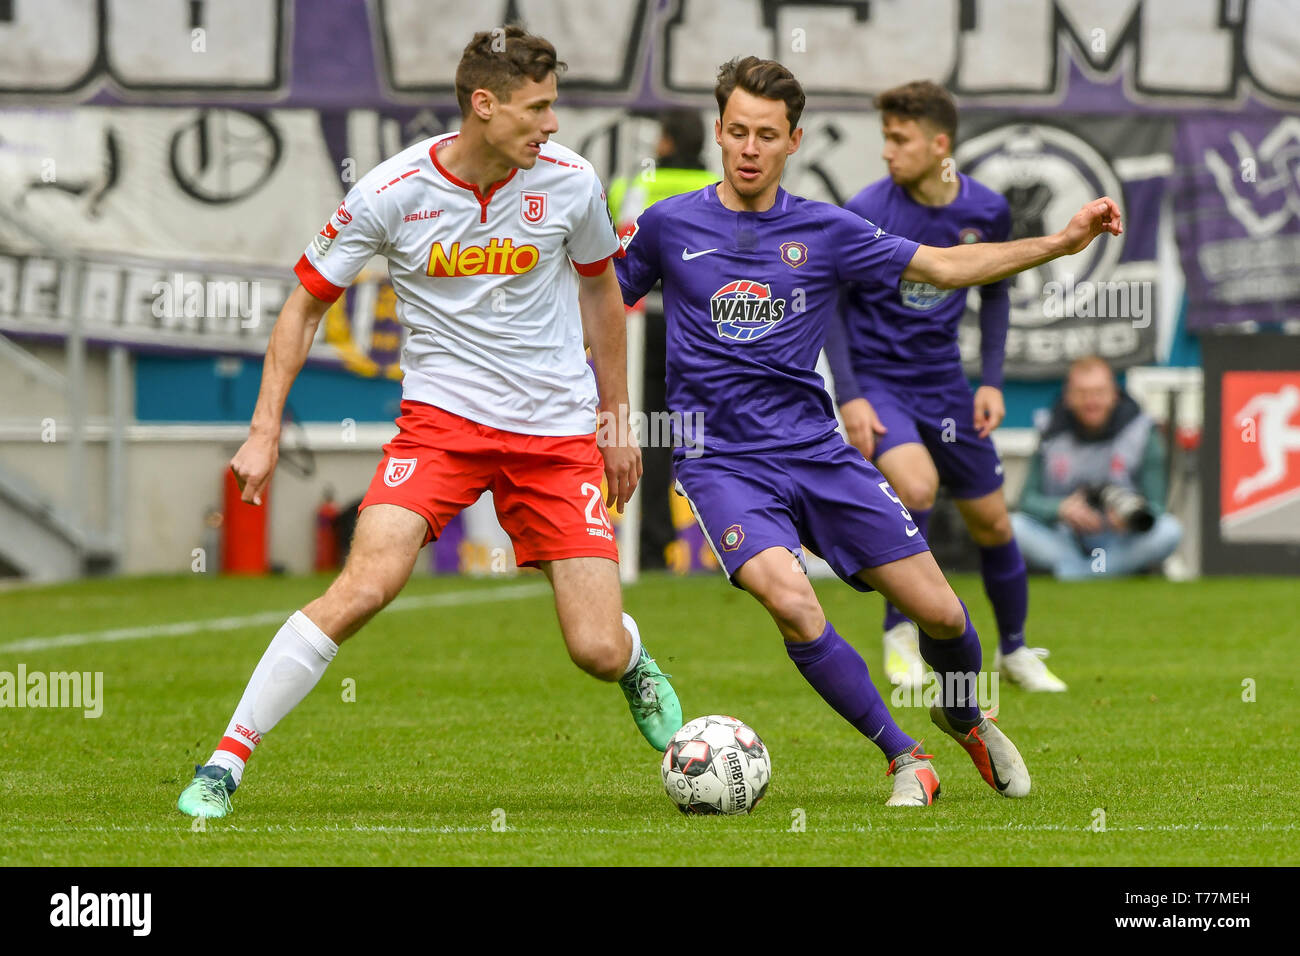 Regensburg, Germany. 05th May, 2019. Soccer: 2nd Bundesliga, Jahn Regensburg - Erzgebirge Aue, 32nd matchday in the Continental Arena. Maximilian Thalhammer of Regensburg (l) and Clemens Fandrich of Aue fight for the ball. Credit: Armin Weigel/dpa - IMPORTANT NOTE: In accordance with the requirements of the DFL Deutsche Fußball Liga or the DFB Deutscher Fußball-Bund, it is prohibited to use or have used photographs taken in the stadium and/or the match in the form of sequence images and/or video-like photo sequences./dpa/Alamy Live News Stock Photo